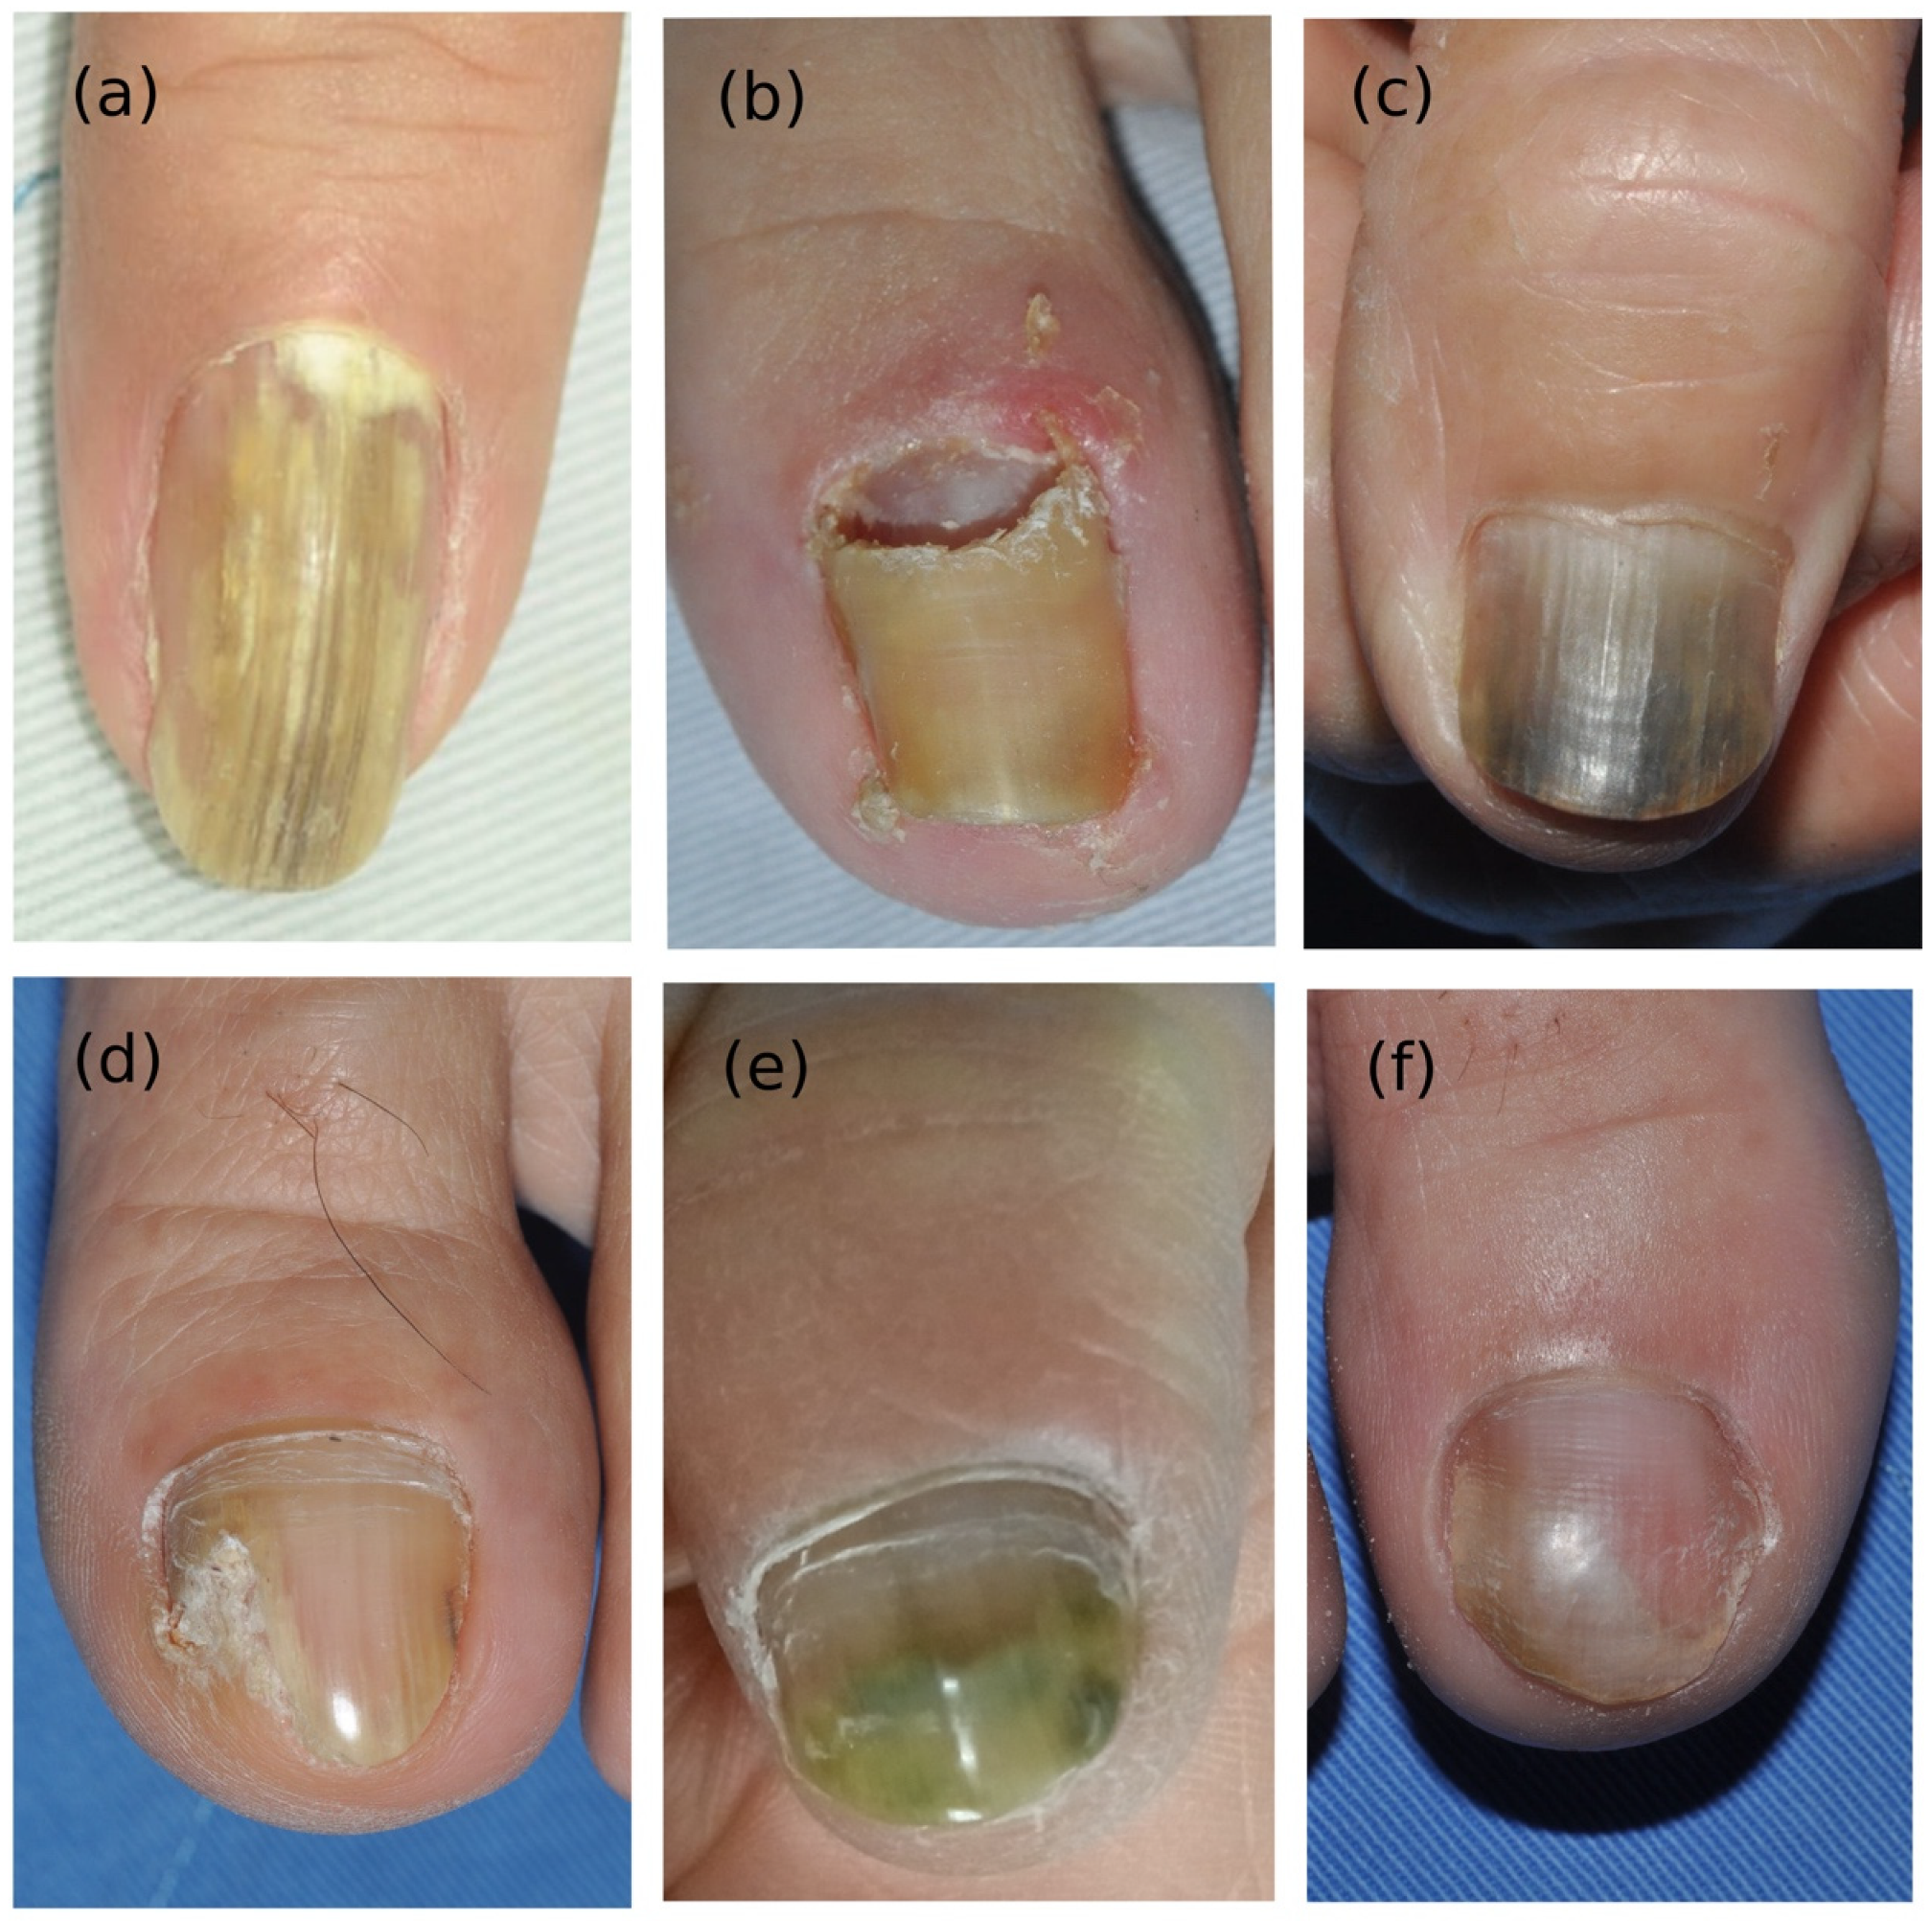 Excel Podiatry Clinic - #Fungal nail infection #onychomycosis #pain #red  #swelling #nails #toes | Facebook